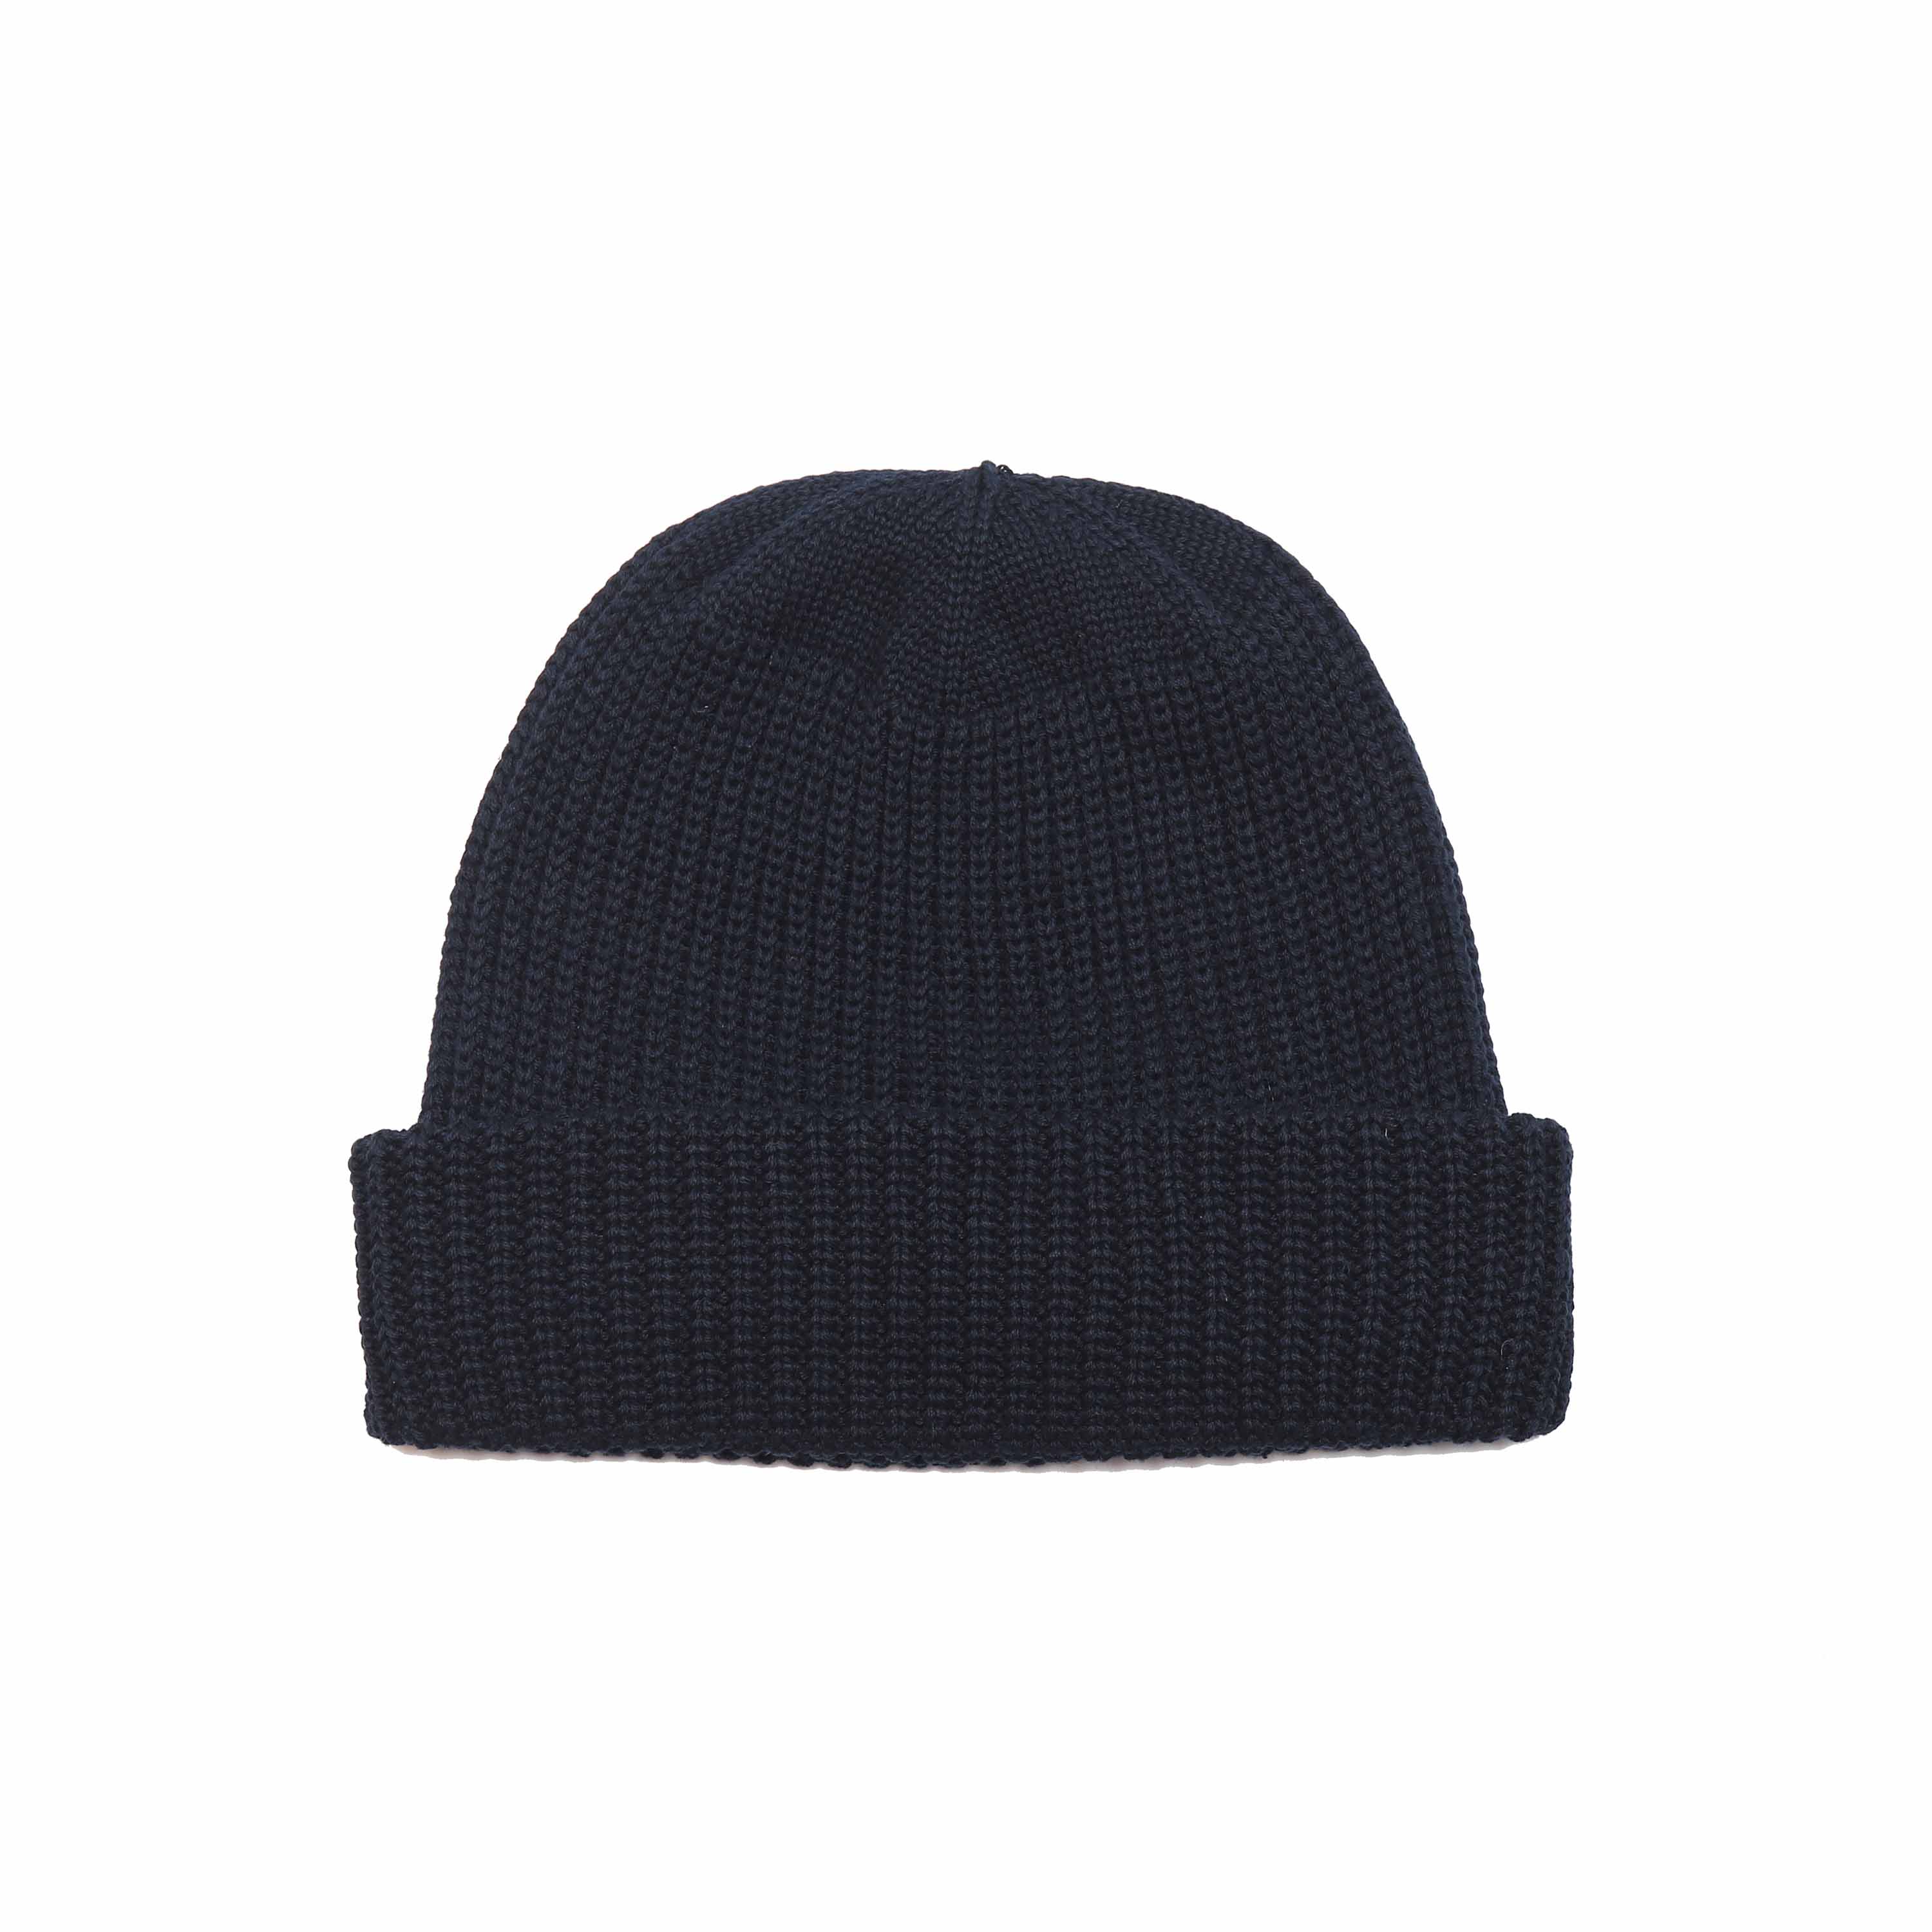 SOUTH FORK COTTON WATCH CAP - NAVY